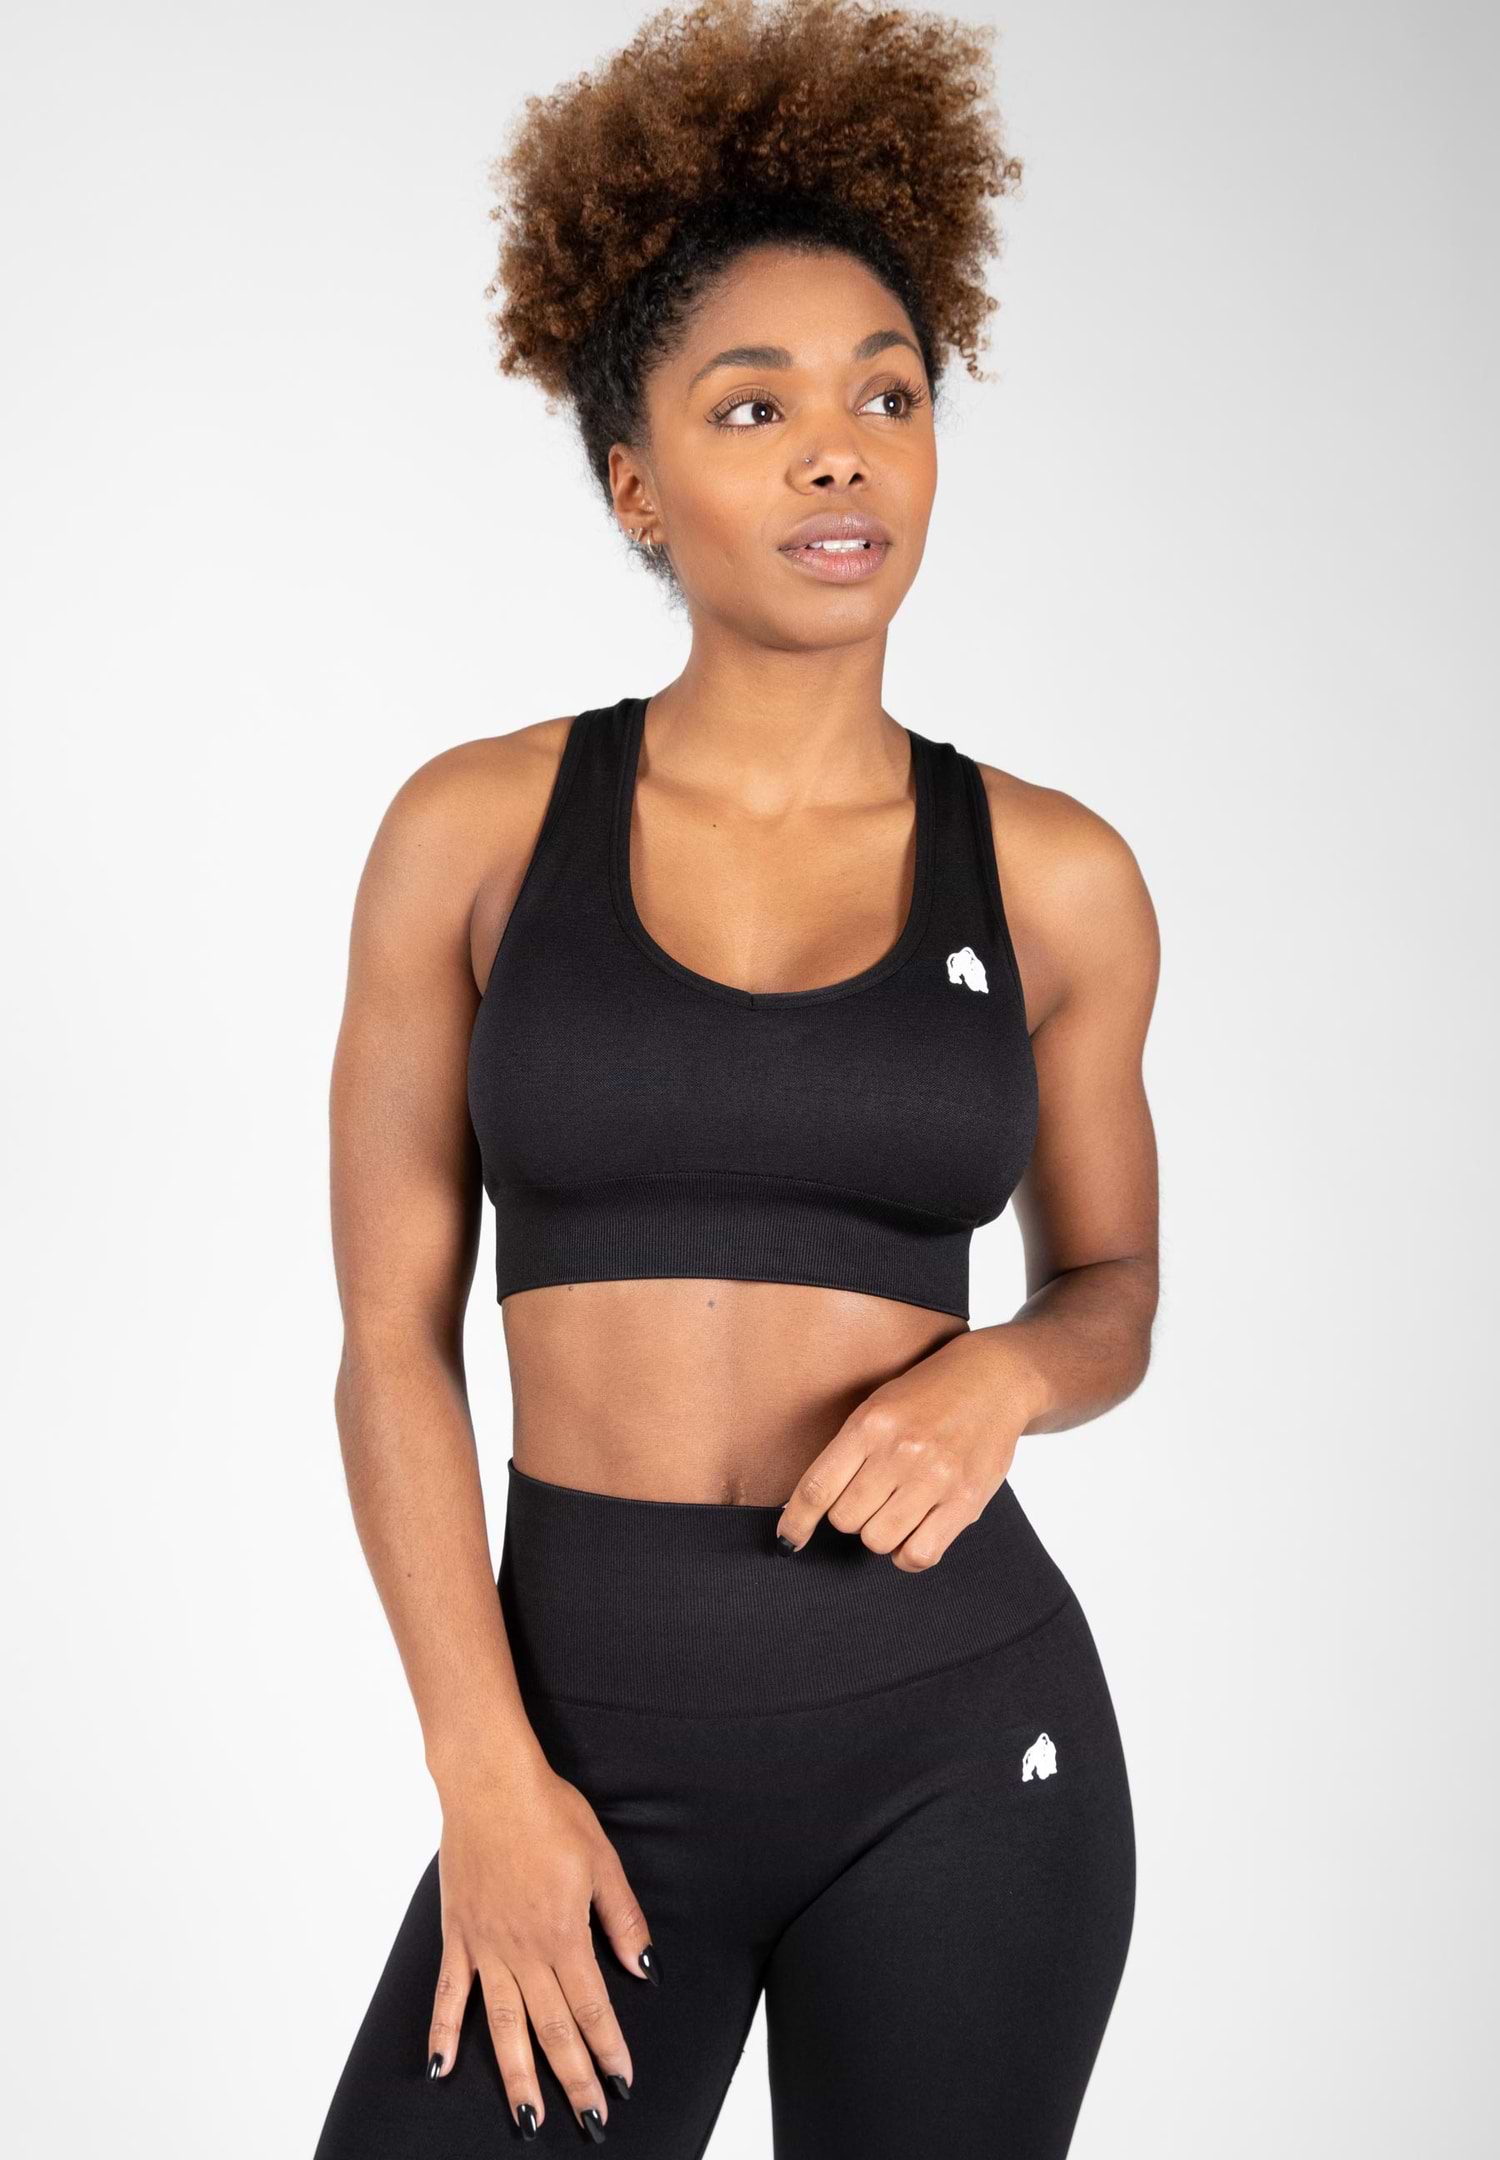 Women's Sports Bras - Sale Up to 90% Off